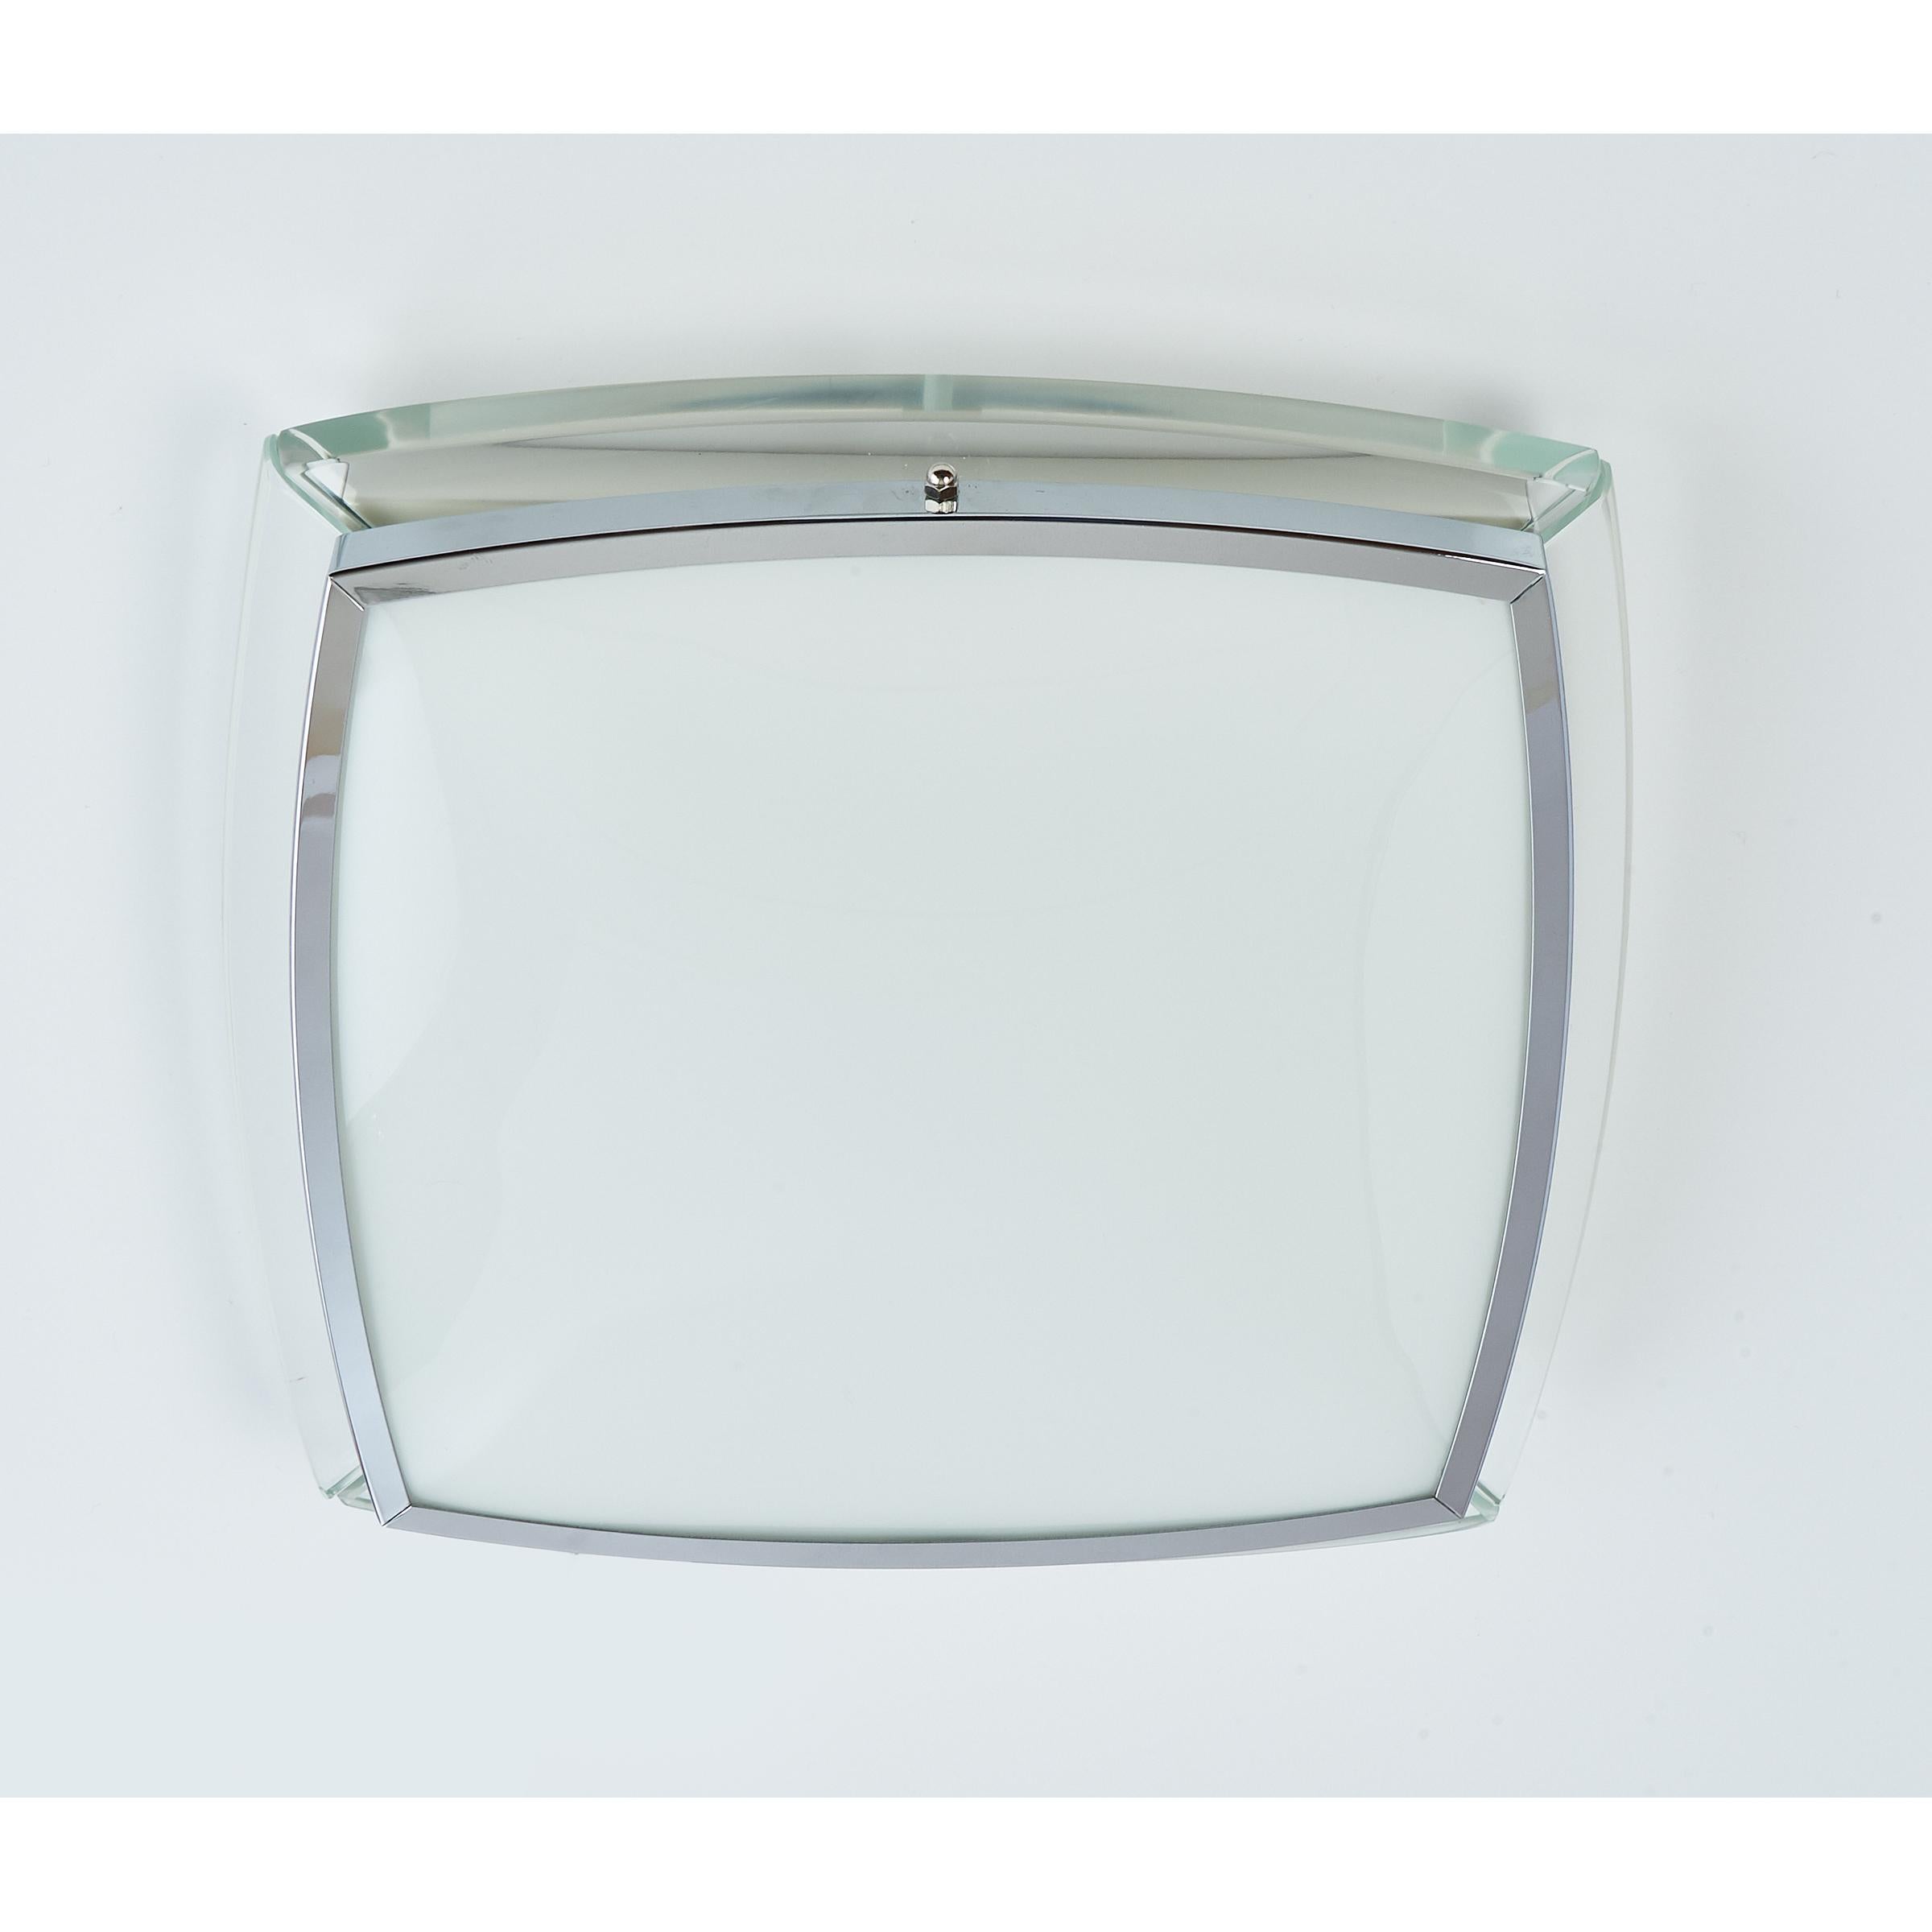 Late 20th Century Squared Nickeled Flush Mount with Thick Clear Glass Frame, 1970s For Sale